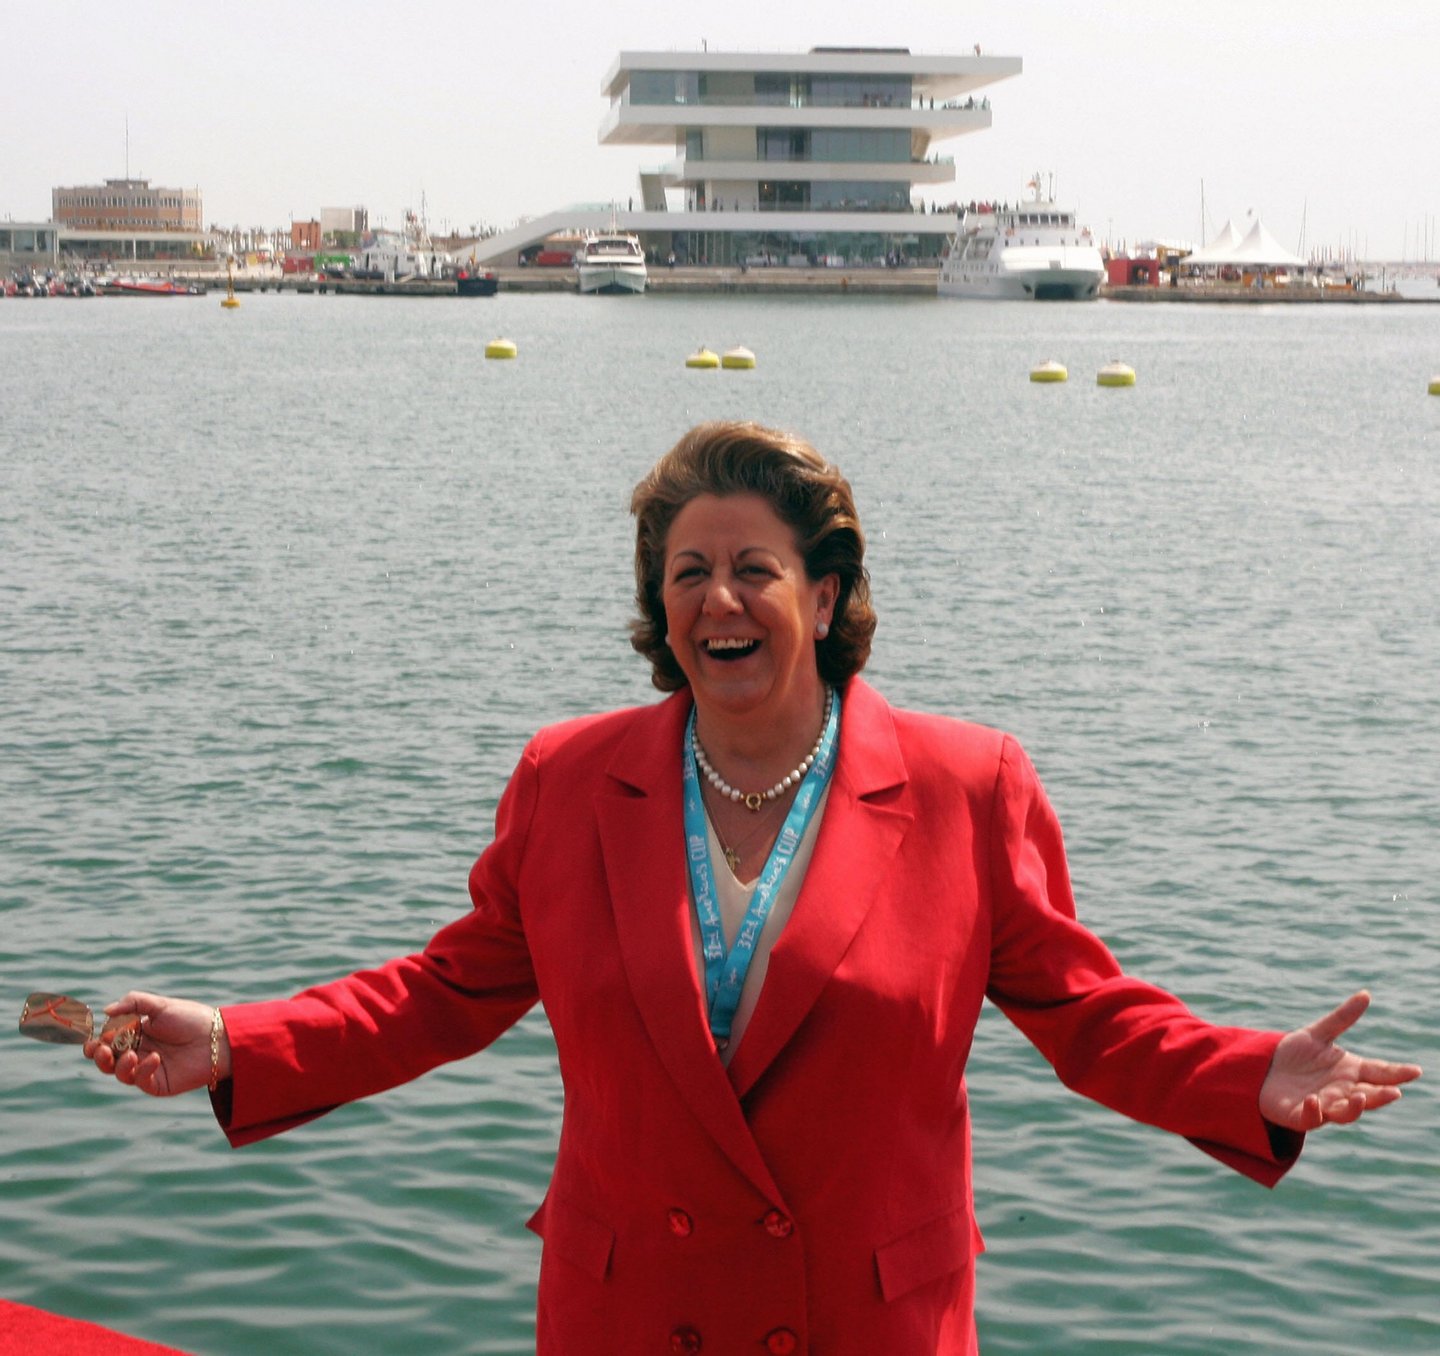 VALENCIA, SPAIN: Valencia's Mayor Rita Barbera poses at the America's Cup port in Valencia, 11 March 2007. The eleven teams who hope to take on the holders Alinghi in Valencia for the prestigious America's Cup are out on the open water training intensely just one month before the knock-out stages. AFP PHOTO/JOSE JORDAN (Photo credit should read JOSE JORDAN/AFP/Getty Images)